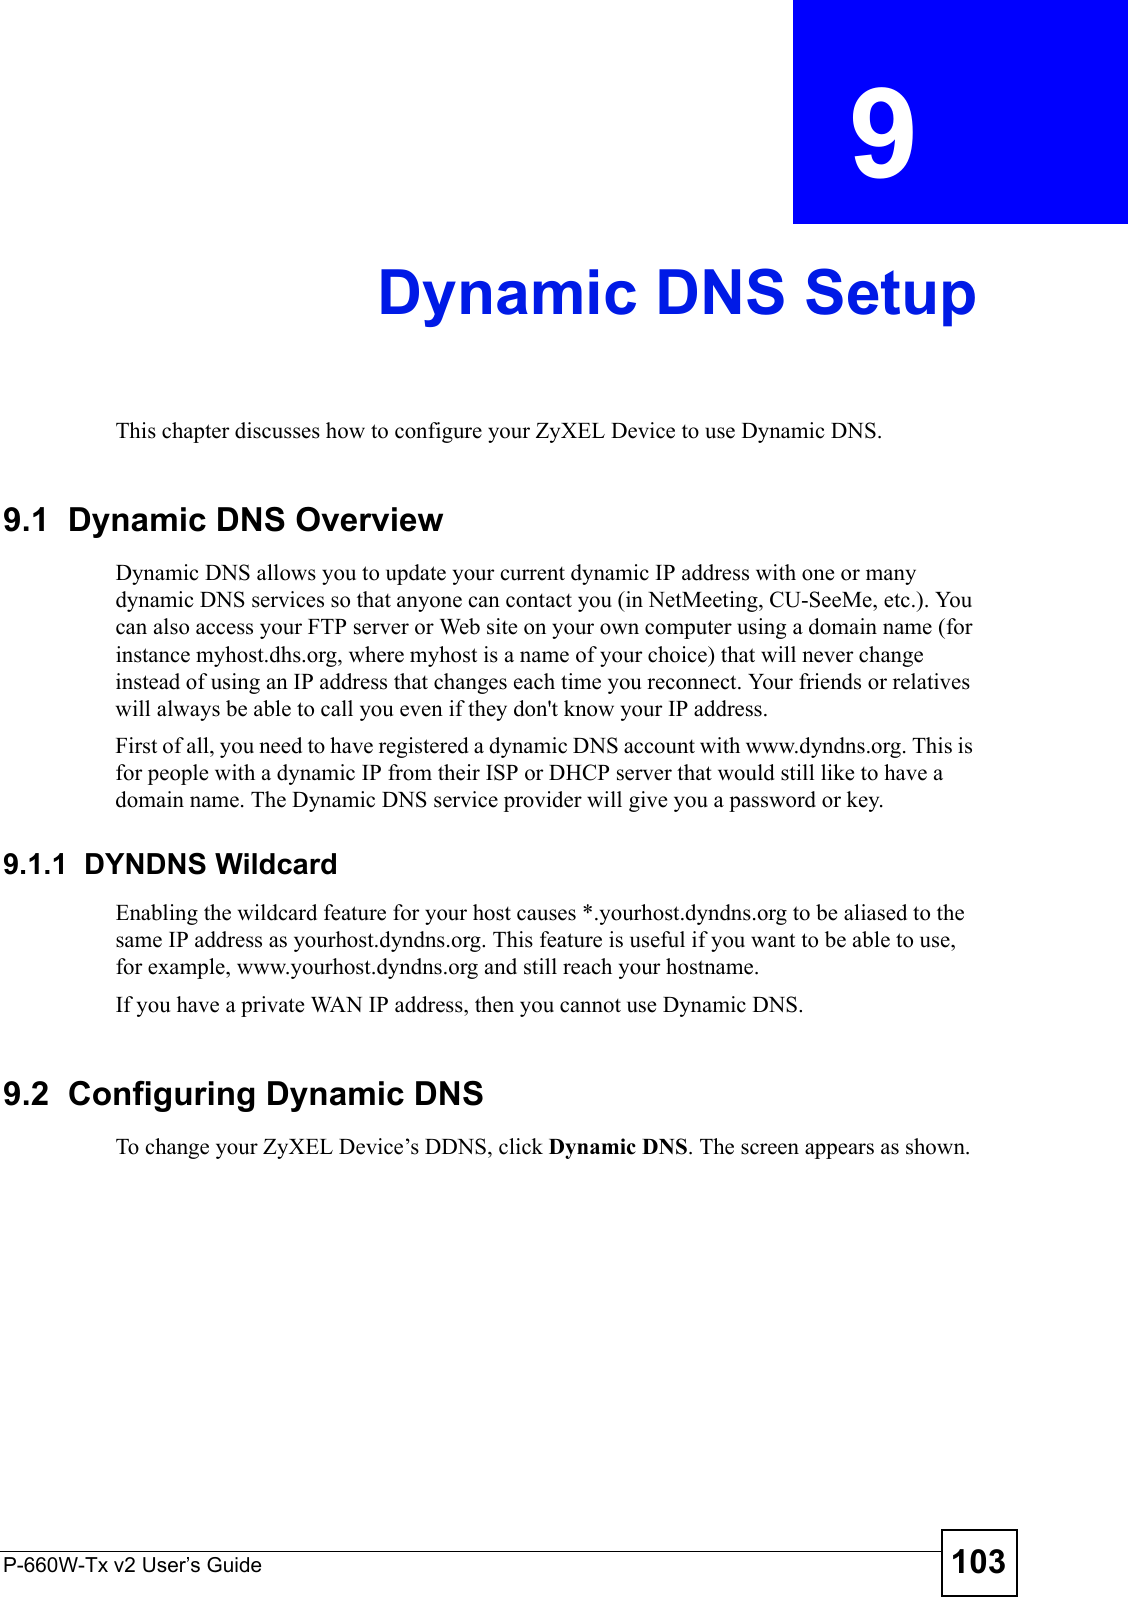 P-660W-Tx v2 User’s Guide 103CHAPTER  9 Dynamic DNS SetupThis chapter discusses how to configure your ZyXEL Device to use Dynamic DNS.9.1  Dynamic DNS Overview Dynamic DNS allows you to update your current dynamic IP address with one or many dynamic DNS services so that anyone can contact you (in NetMeeting, CU-SeeMe, etc.). You can also access your FTP server or Web site on your own computer using a domain name (for instance myhost.dhs.org, where myhost is a name of your choice) that will never change instead of using an IP address that changes each time you reconnect. Your friends or relatives will always be able to call you even if they don&apos;t know your IP address.First of all, you need to have registered a dynamic DNS account with www.dyndns.org. This is for people with a dynamic IP from their ISP or DHCP server that would still like to have a domain name. The Dynamic DNS service provider will give you a password or key. 9.1.1  DYNDNS WildcardEnabling the wildcard feature for your host causes *.yourhost.dyndns.org to be aliased to the same IP address as yourhost.dyndns.org. This feature is useful if you want to be able to use, for example, www.yourhost.dyndns.org and still reach your hostname.If you have a private WAN IP address, then you cannot use Dynamic DNS.9.2  Configuring Dynamic DNS To change your ZyXEL Device’s DDNS, click Dynamic DNS. The screen appears as shown.